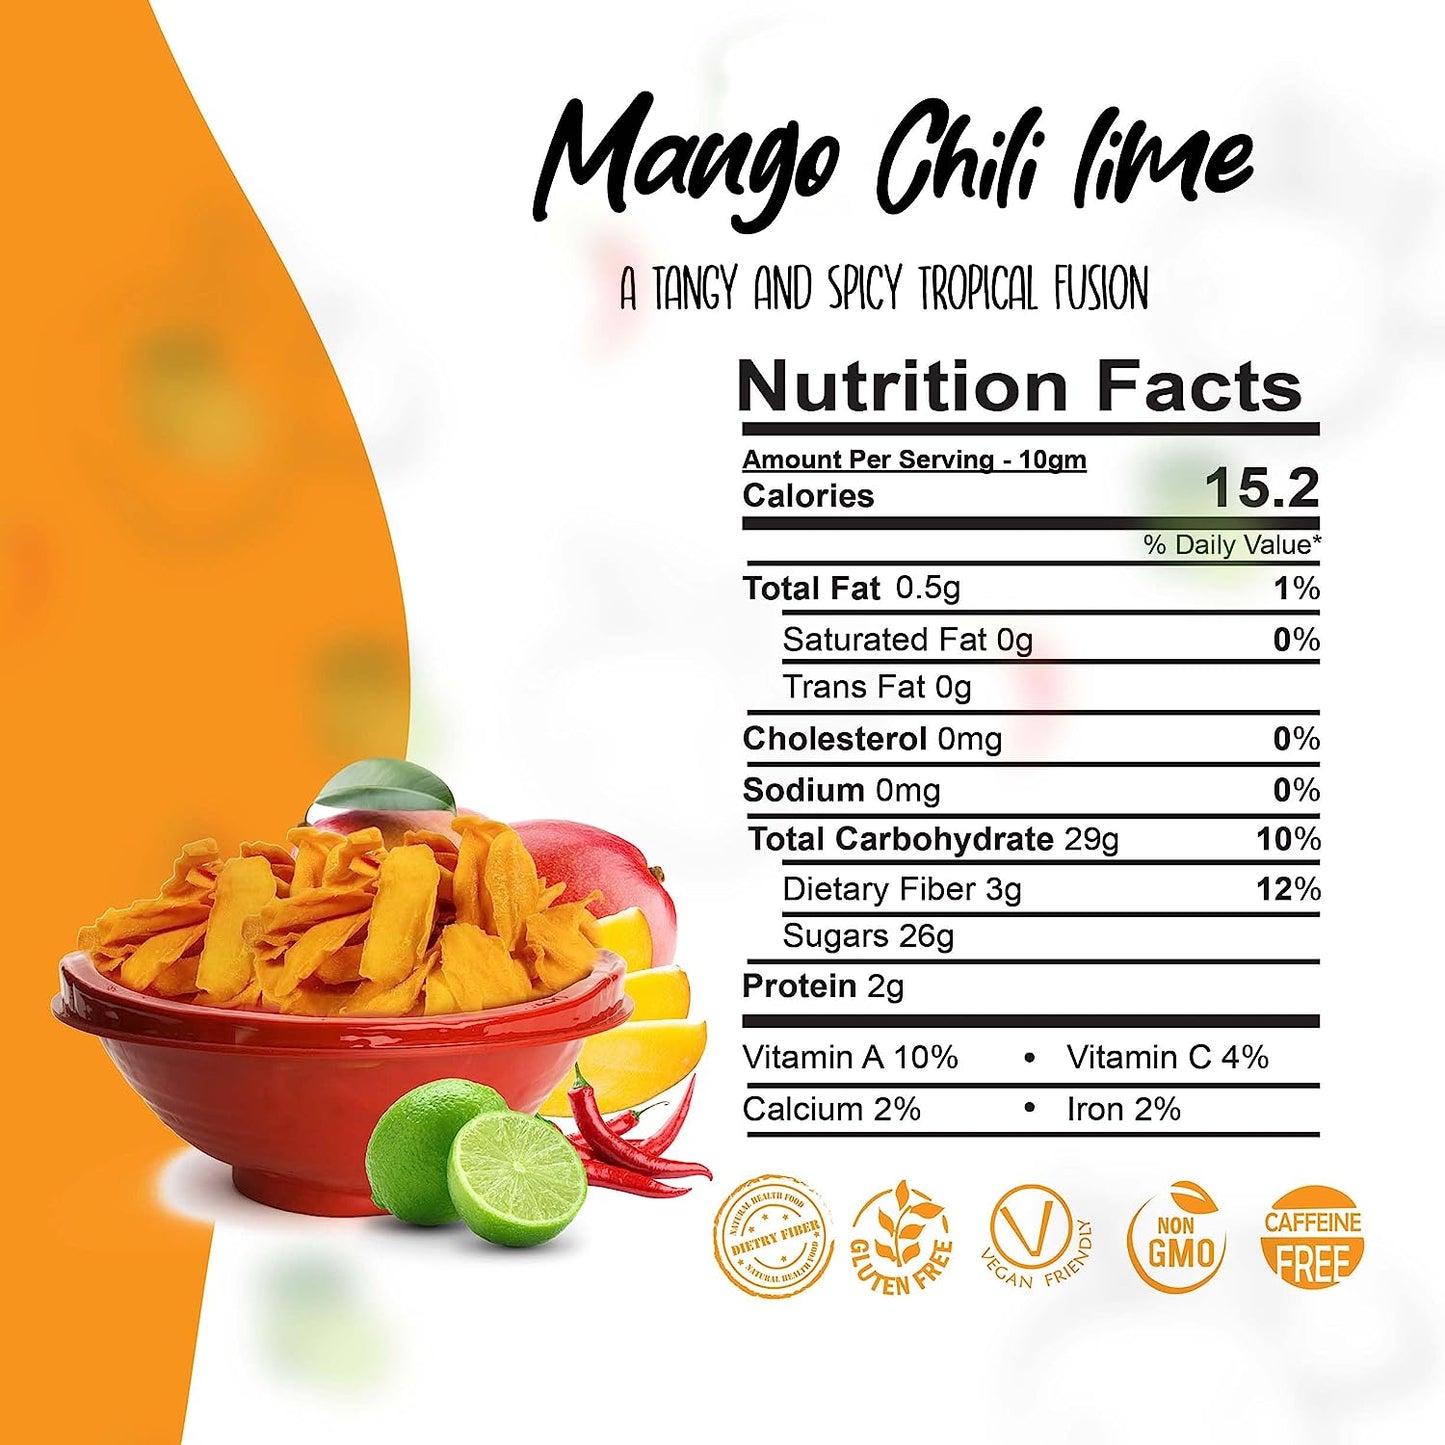 
                  
                    Akshit Organic Dried Mango, 1Pound, Dried Chili Mango Slices with Lime, Unsweetened Dried Mango Slices, Healthy Dehydrated Mango Slices for Adults & Kids, Vegan, Non-Gmo, Organic dried Mango, No Sugar Added, Dried Mango, Great Source of Vitamins.16oz
                  
                